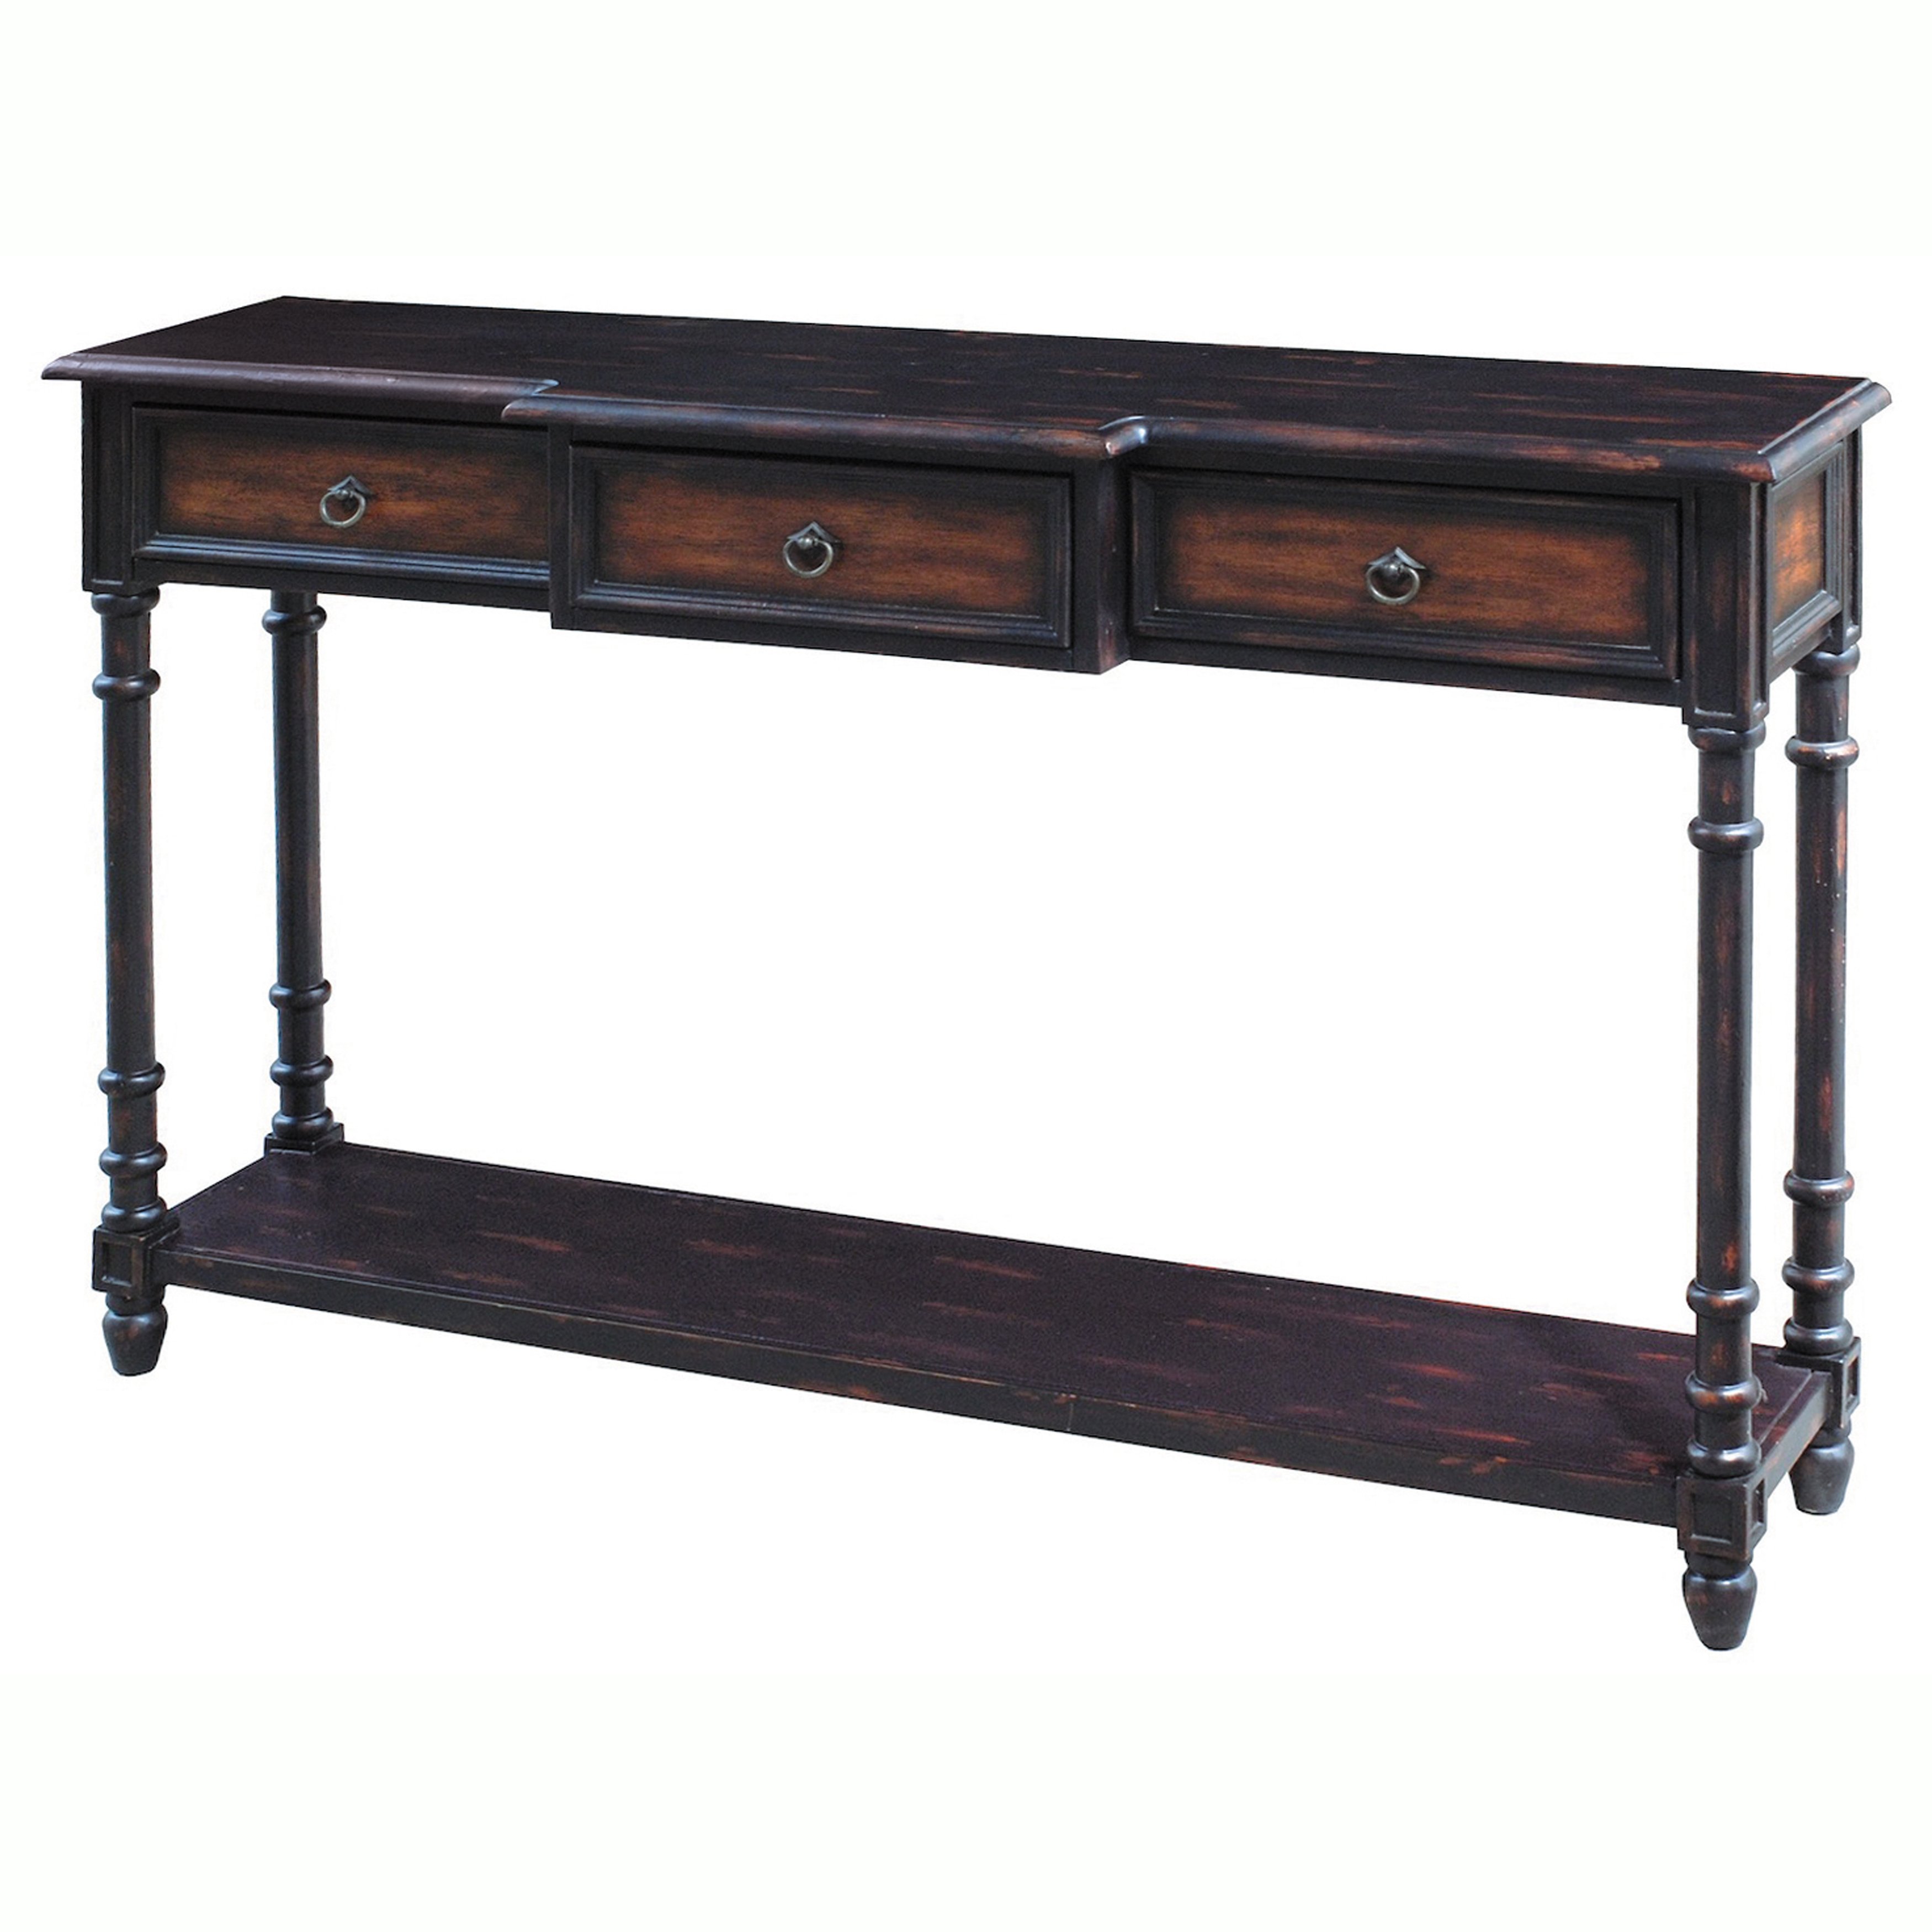 hand painted distressed black brown finish accent console table sofa tables tripod plant stand round couch end lawn umbrella glass coffee blue cabinet pub bar furniture marble top